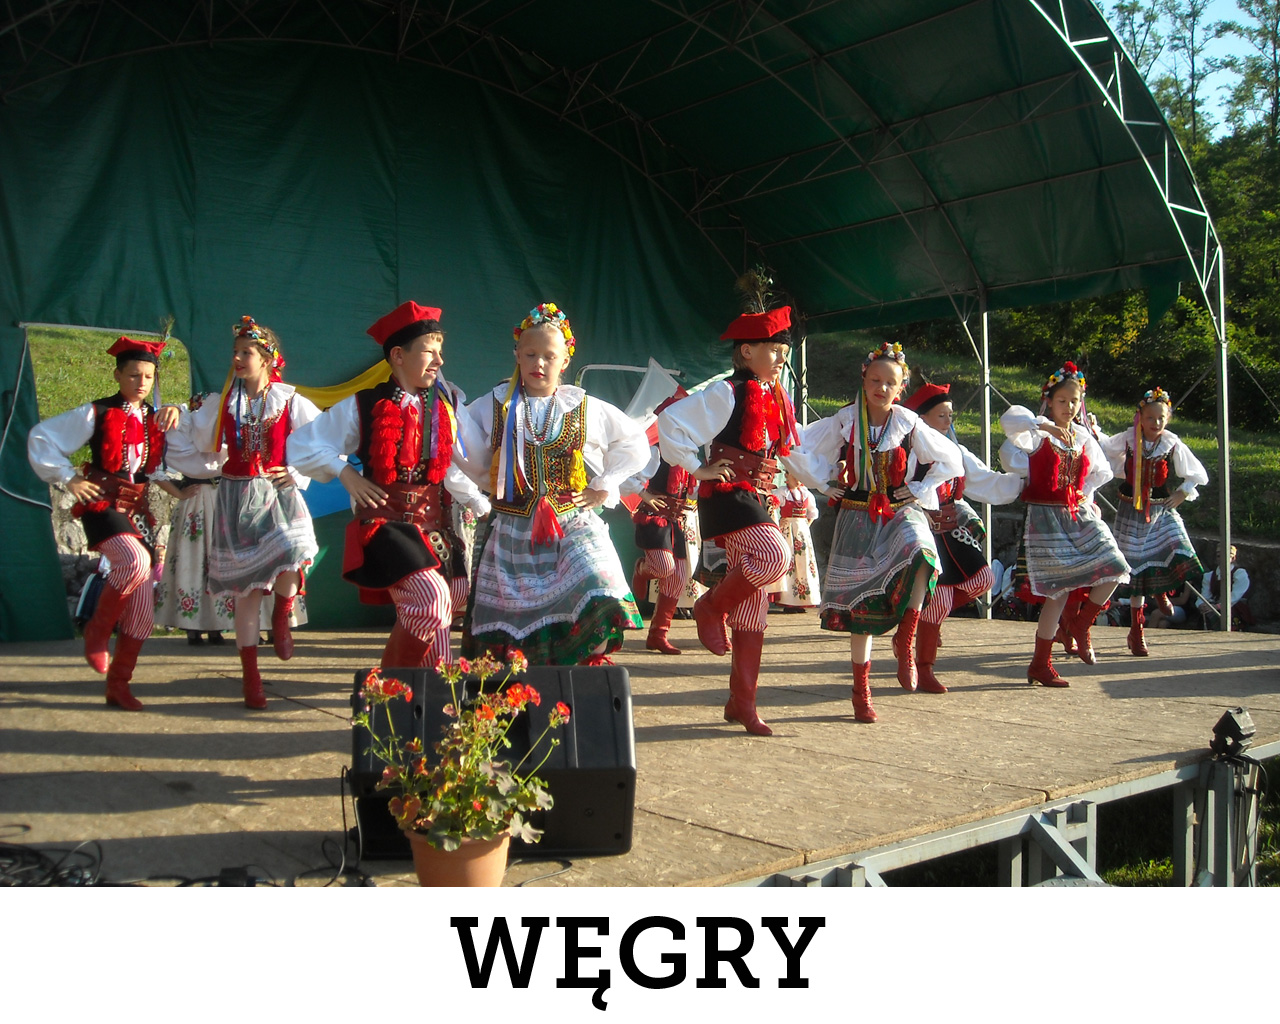 Węgry, 2008 r.